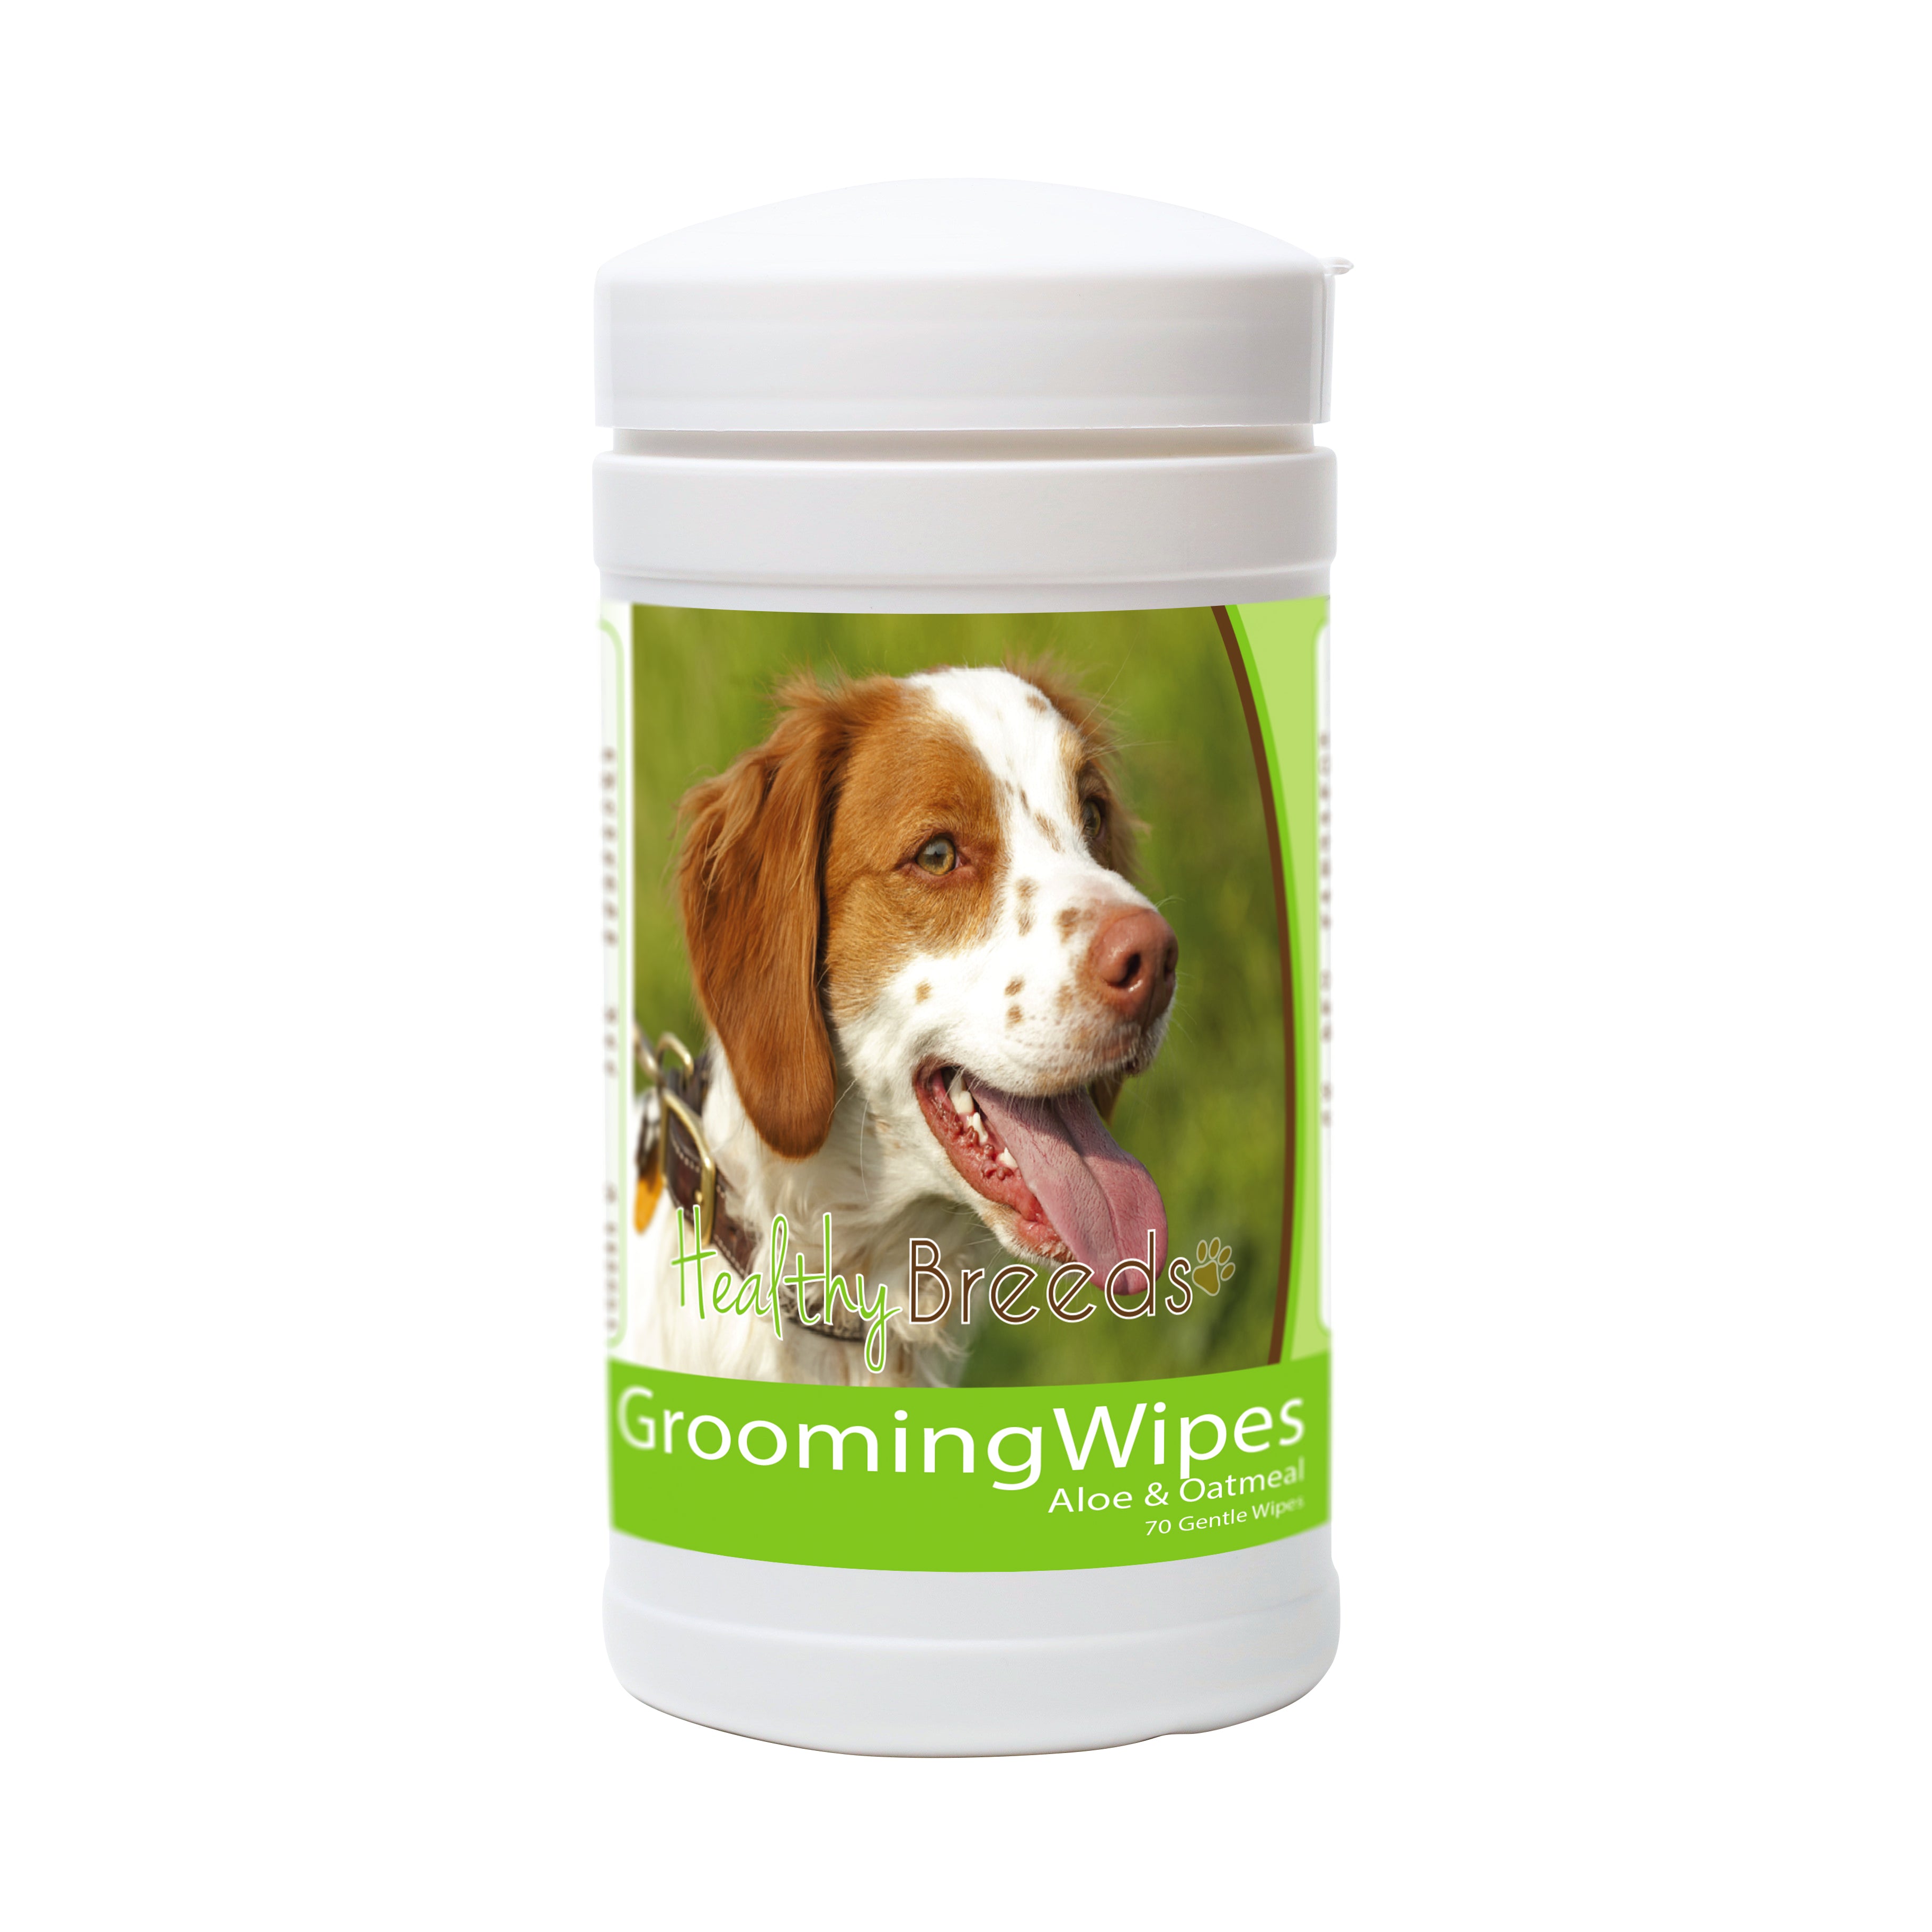 Brittany Grooming Wipes 70 Count